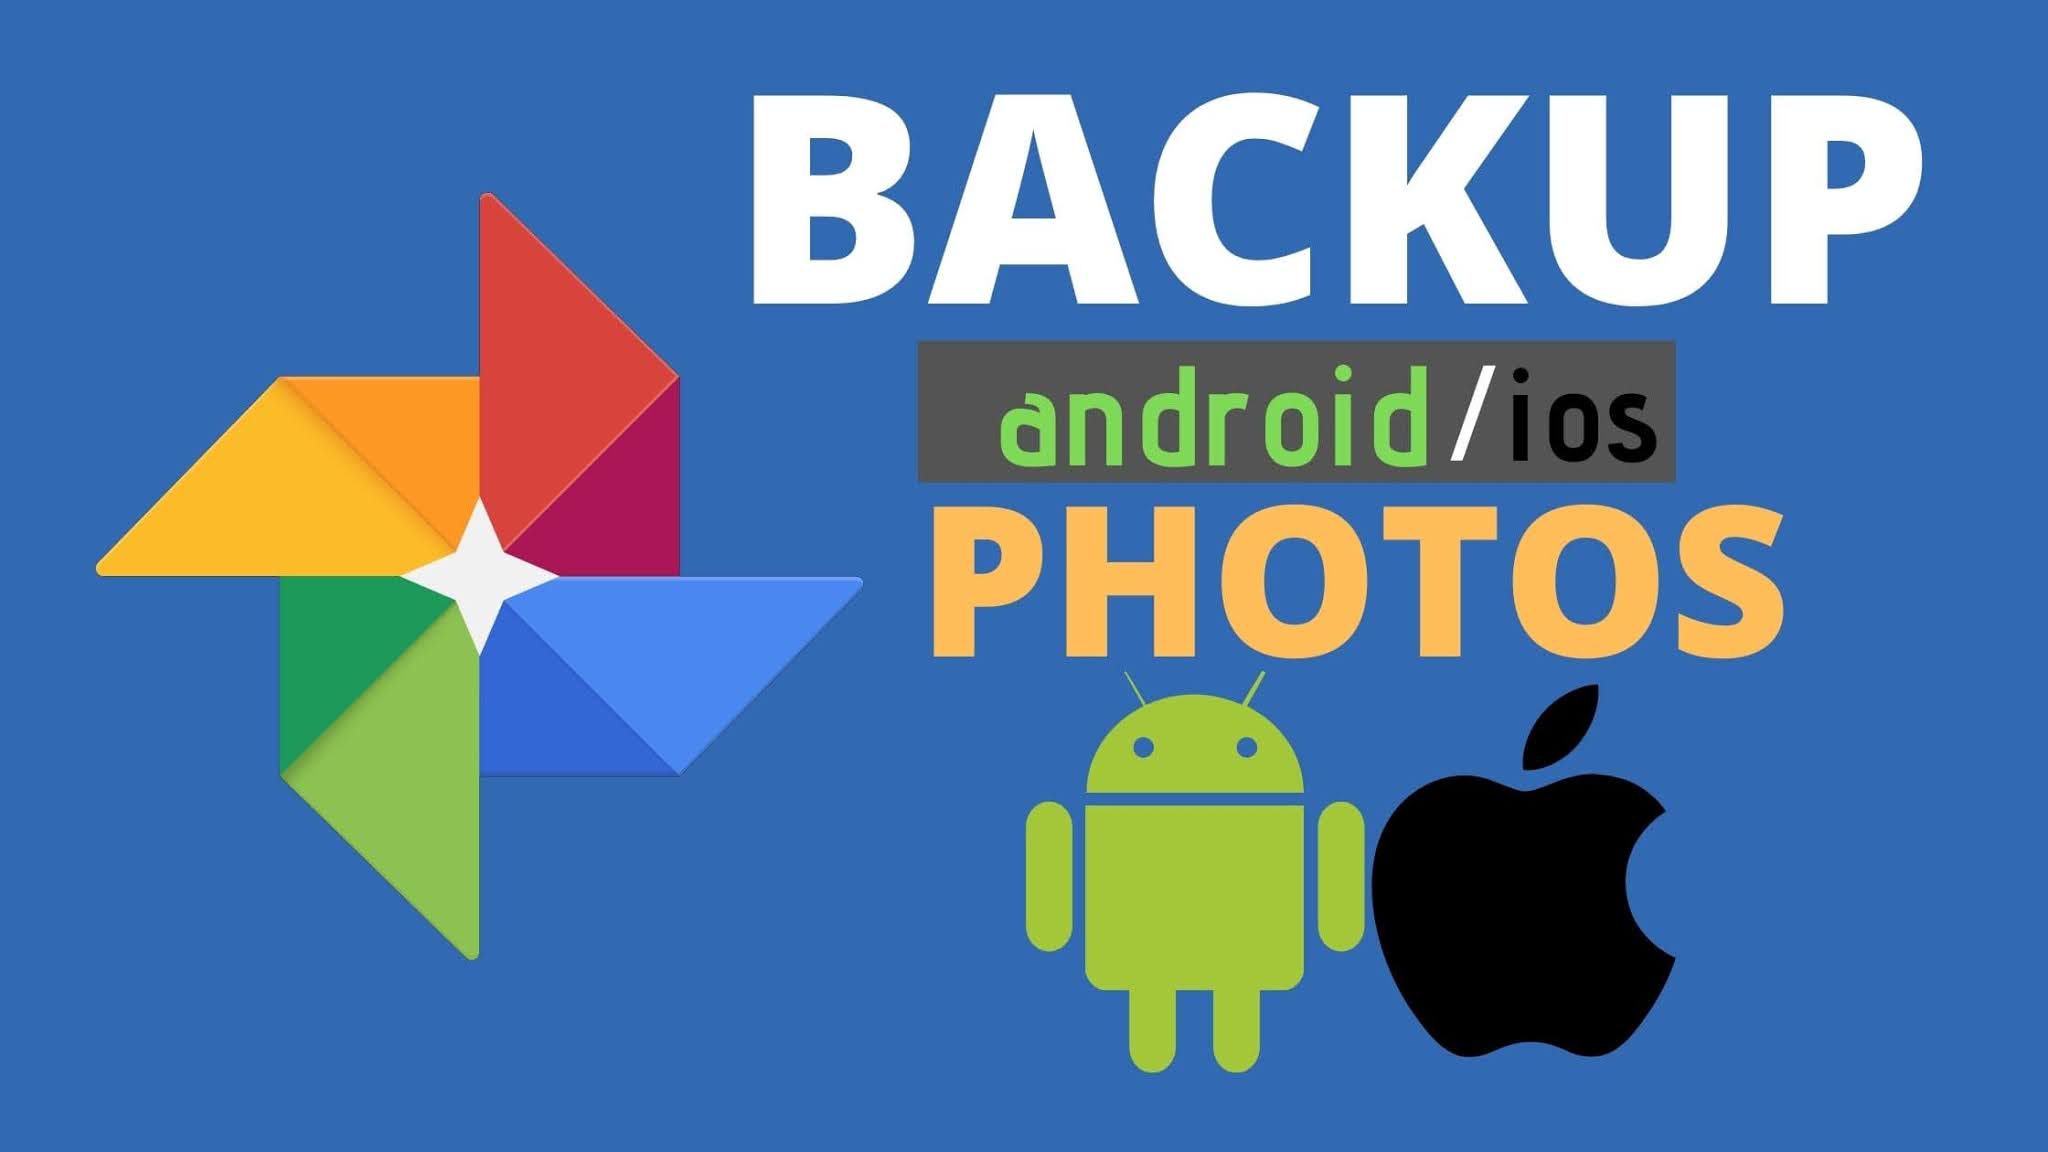 How to backup your all Android/iOS photos into one place